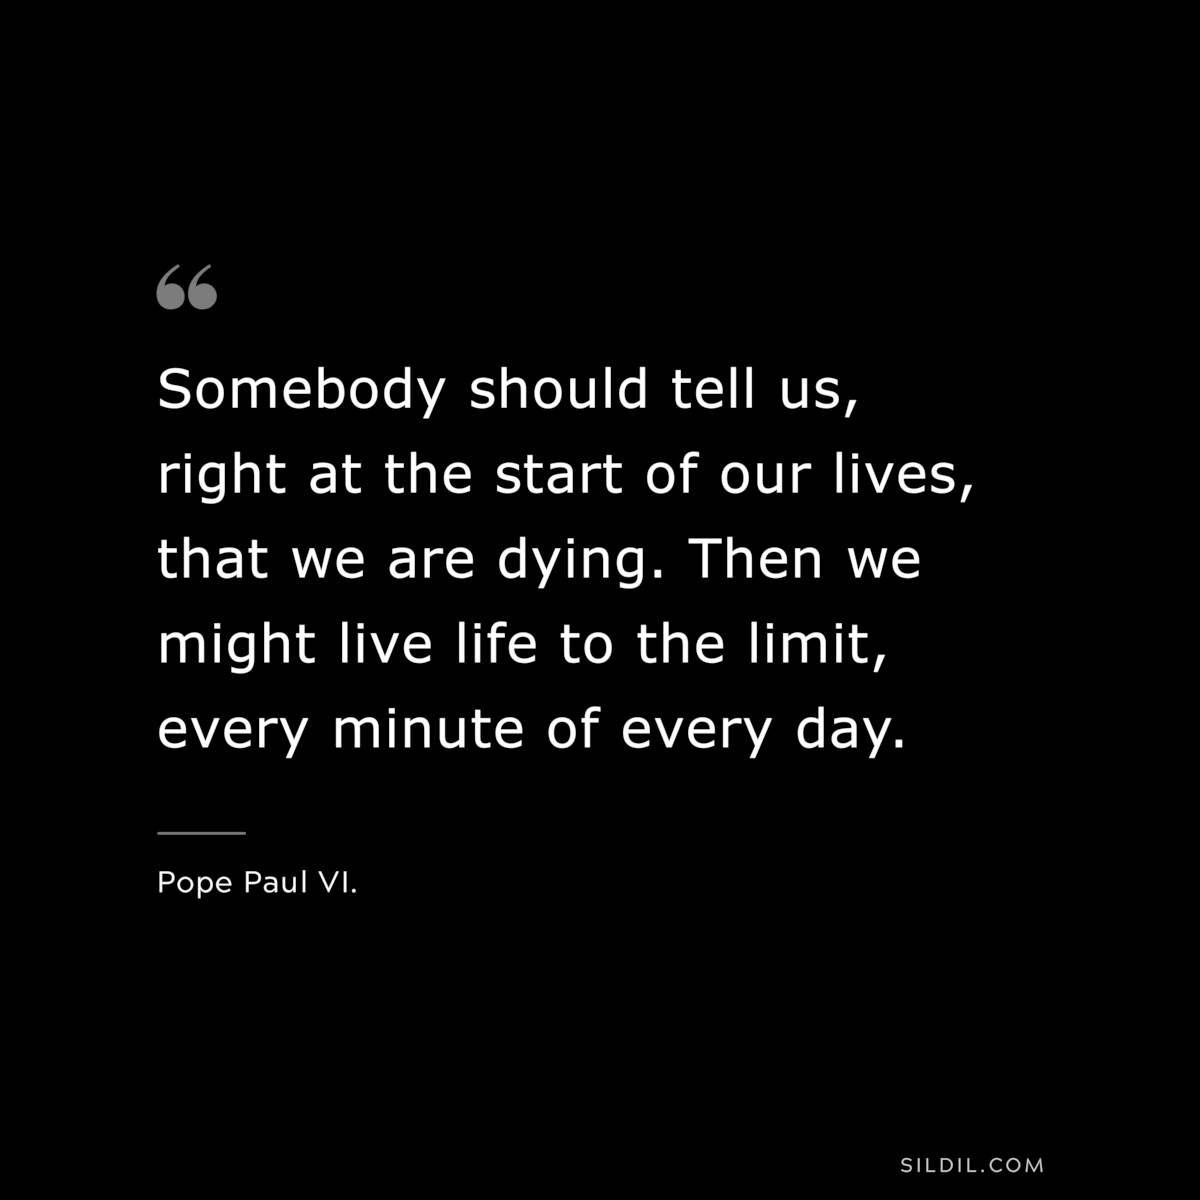 Somebody should tell us, right at the start of our lives, that we are dying. Then we might live life to the limit, every minute of every day. ― Pope Paul VI.